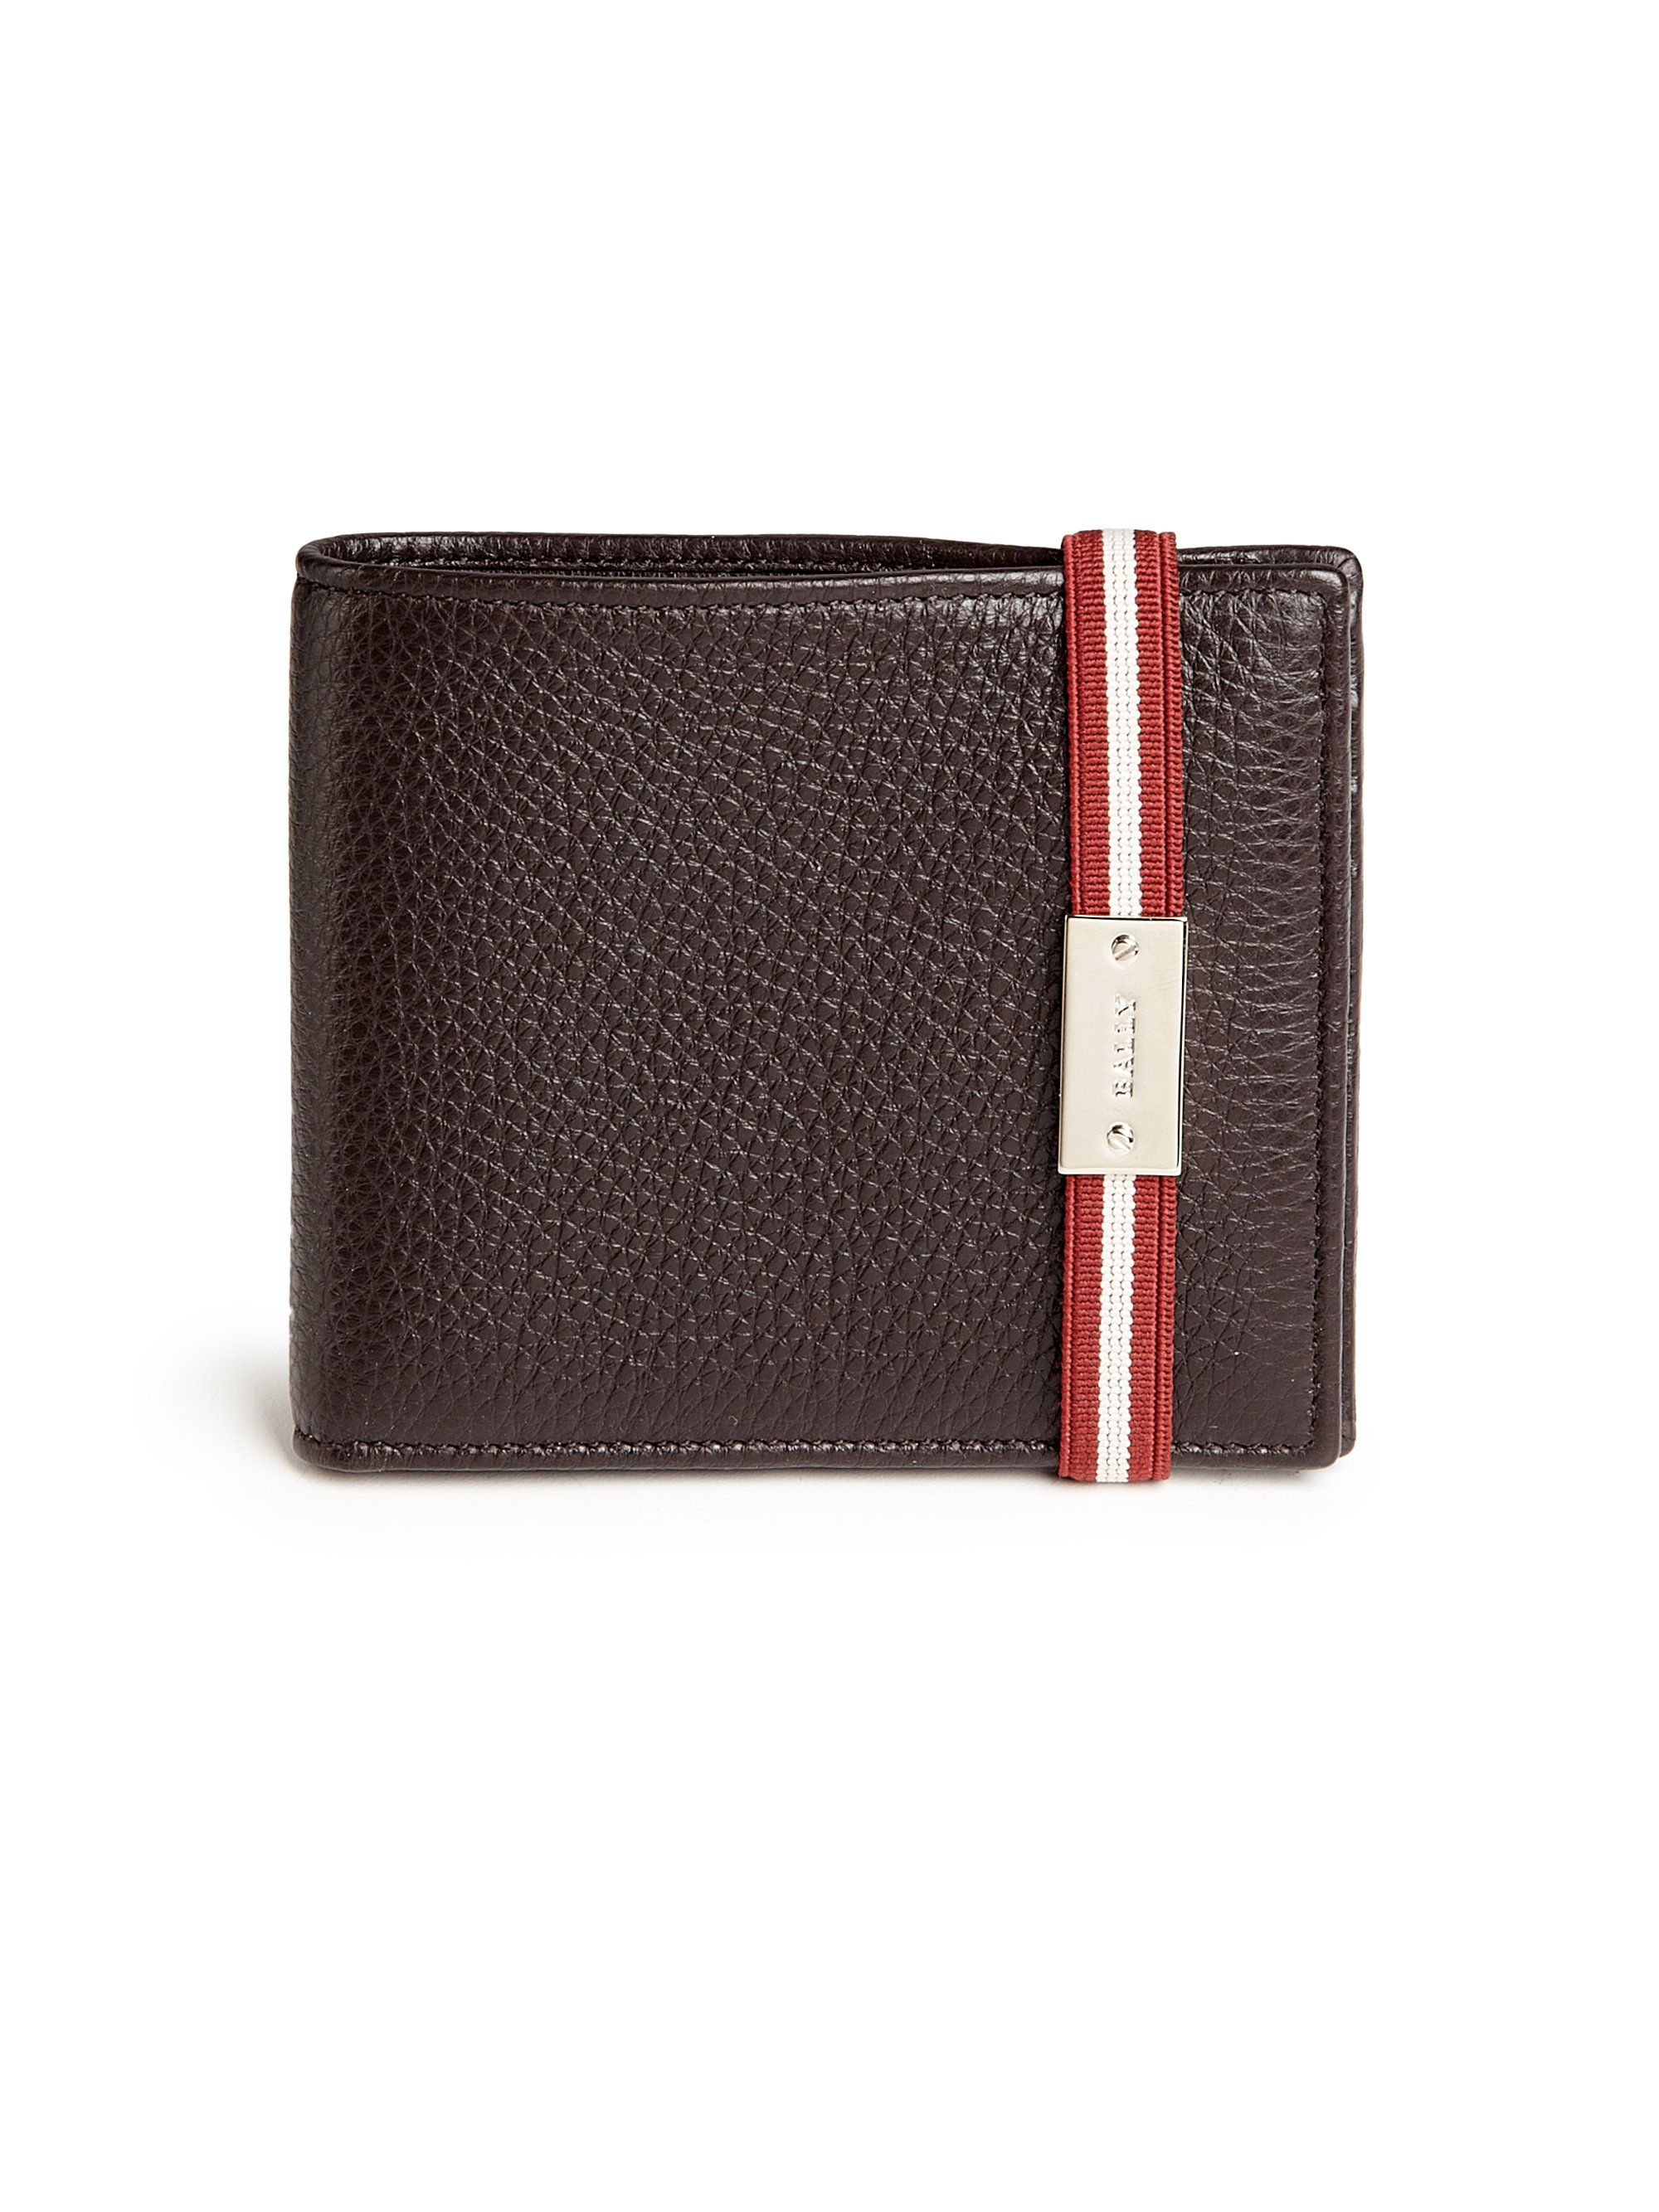 Bally Cuche Leather Billfold Wallet in Chocolate (Brown) for Men - Lyst